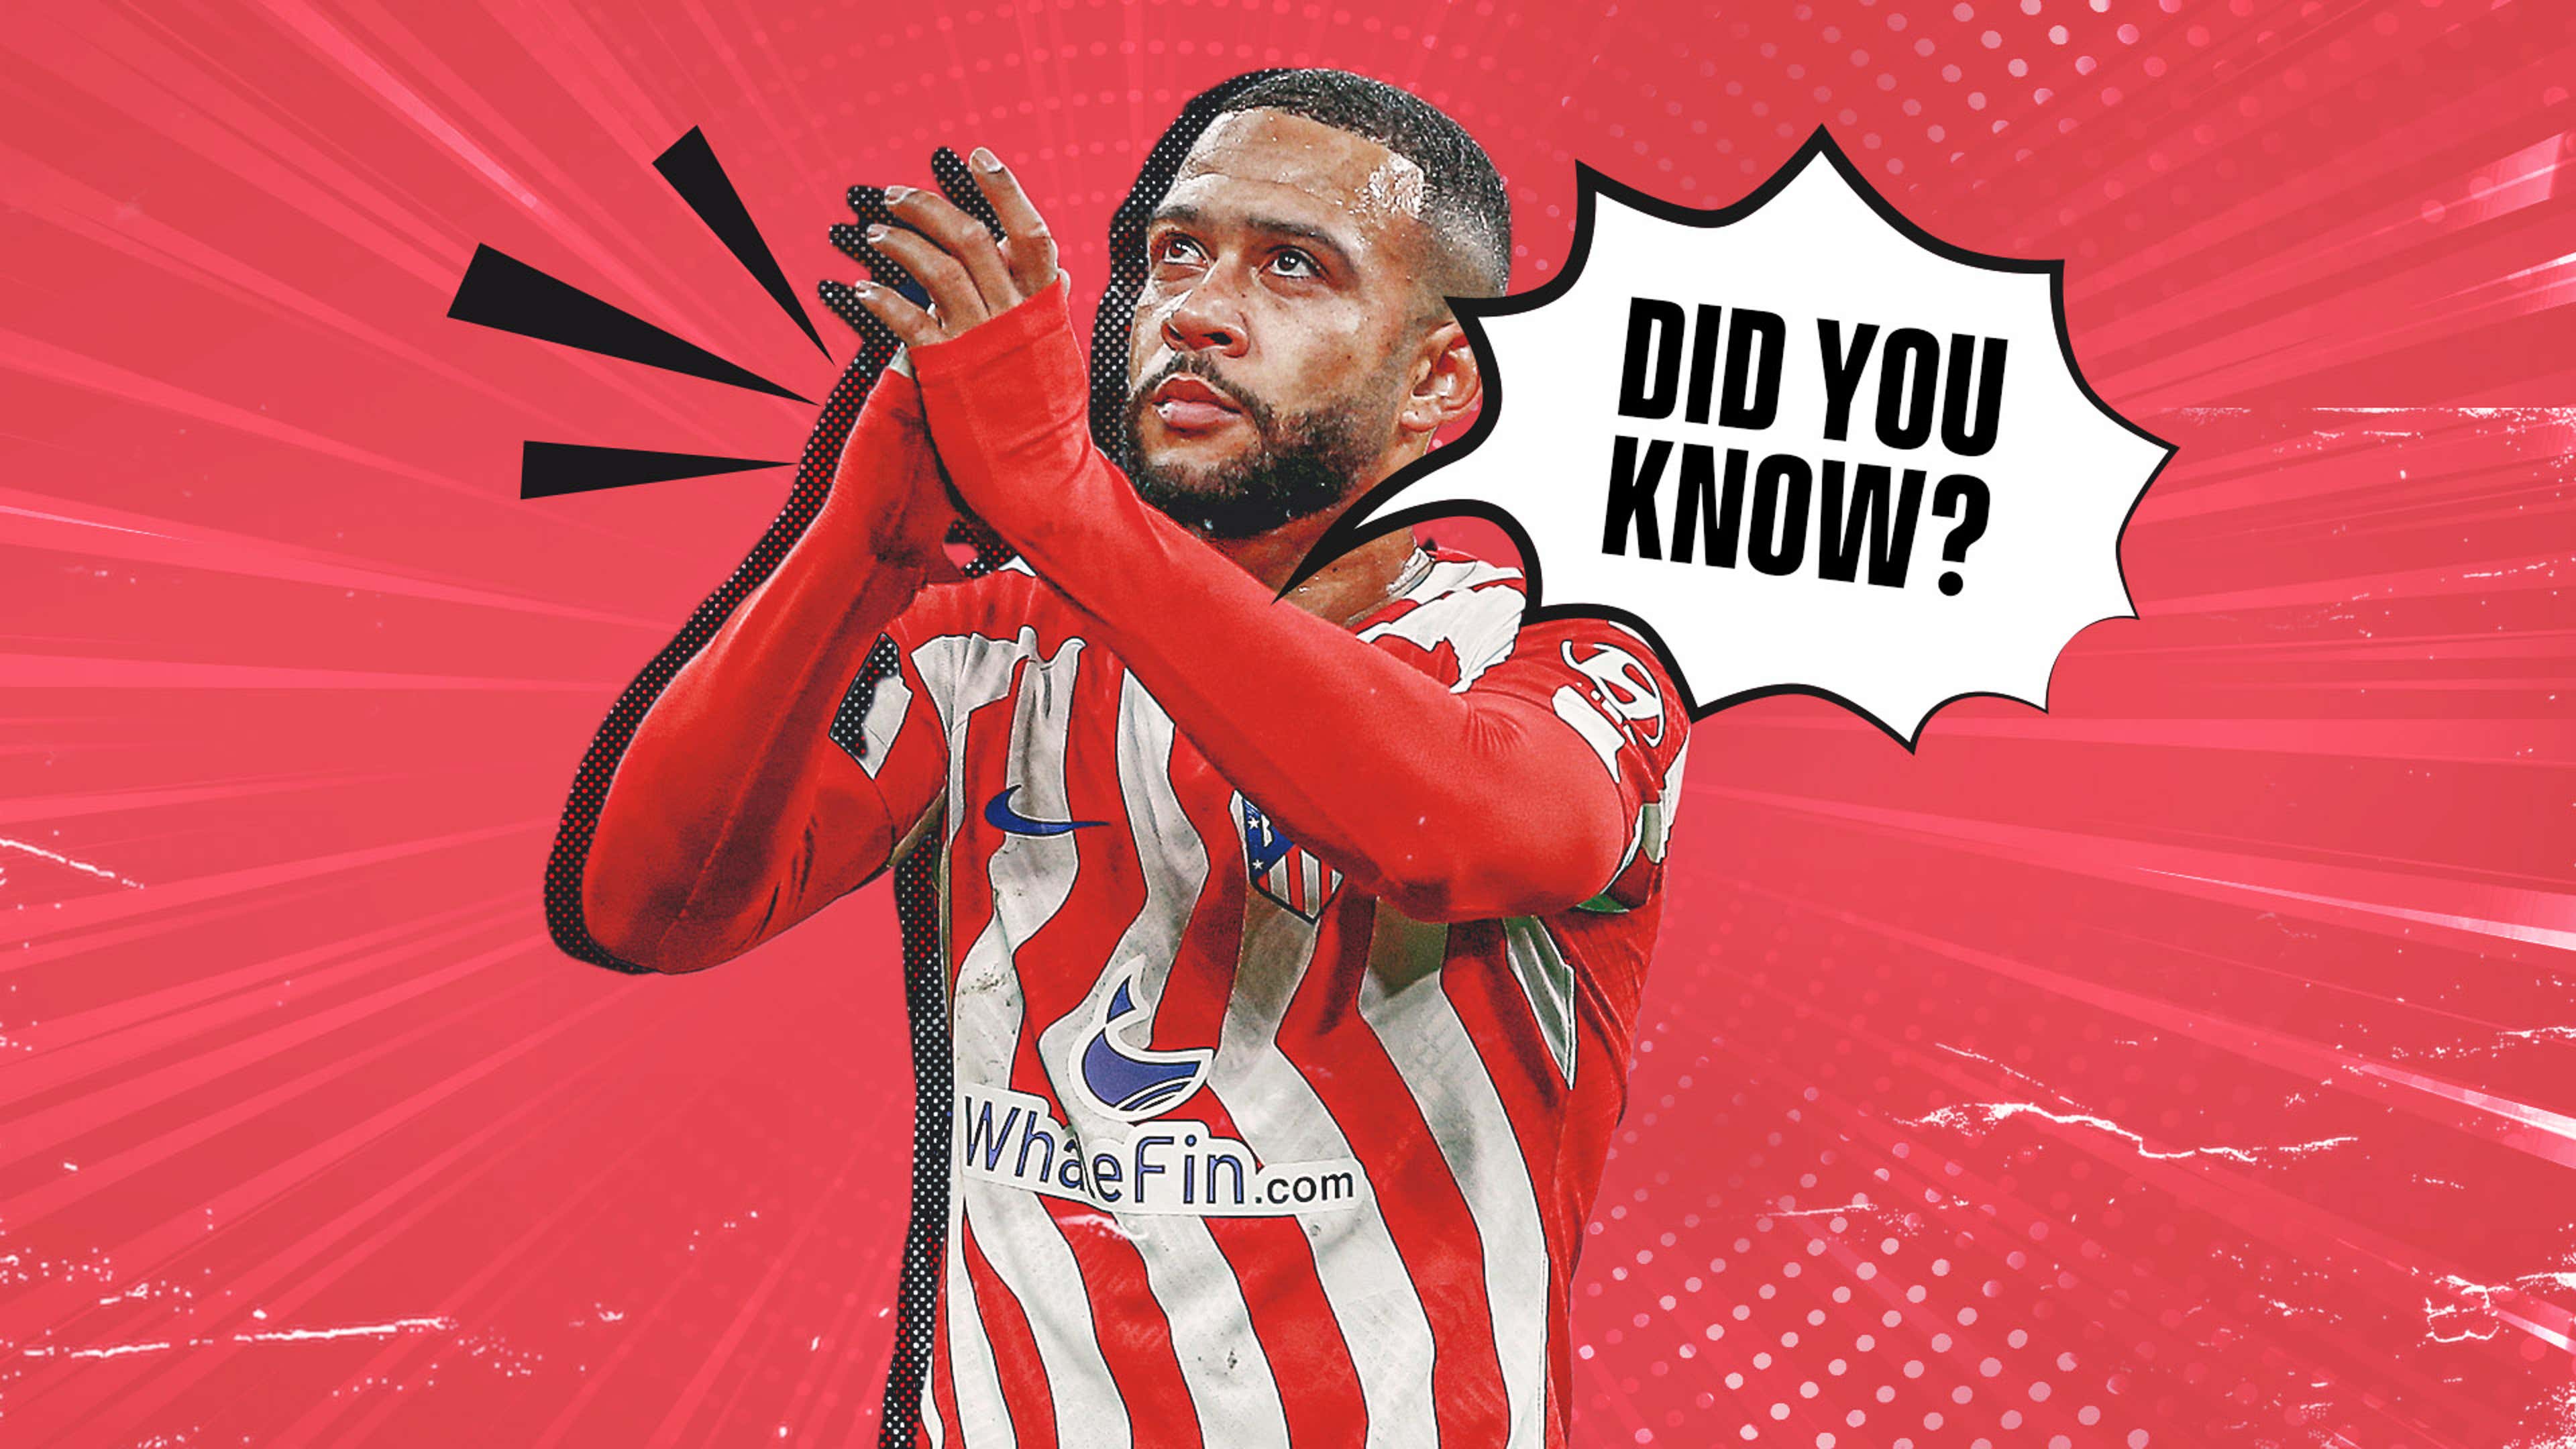 Memphis Depay: Five Things You may not know about the Atletico